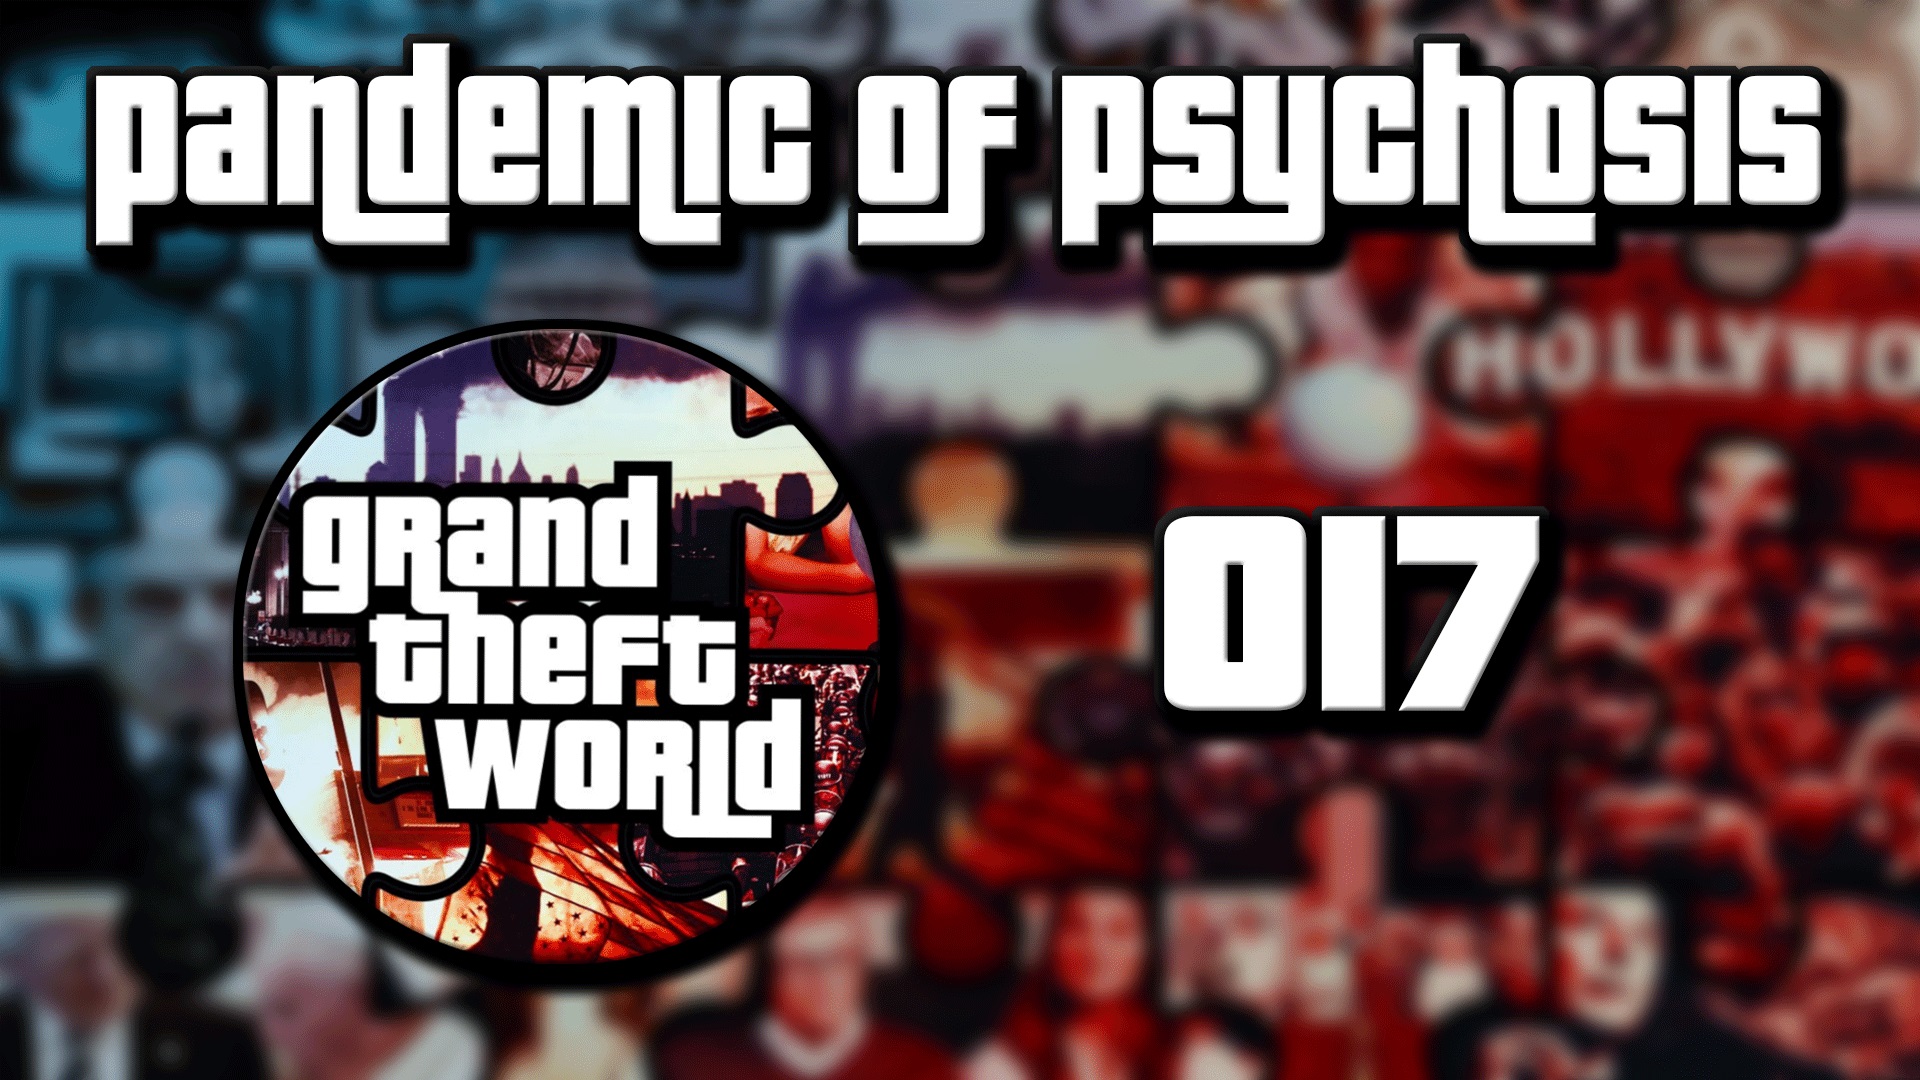 Grand Theft World Podcast 017 | Pandemic of Psychosis